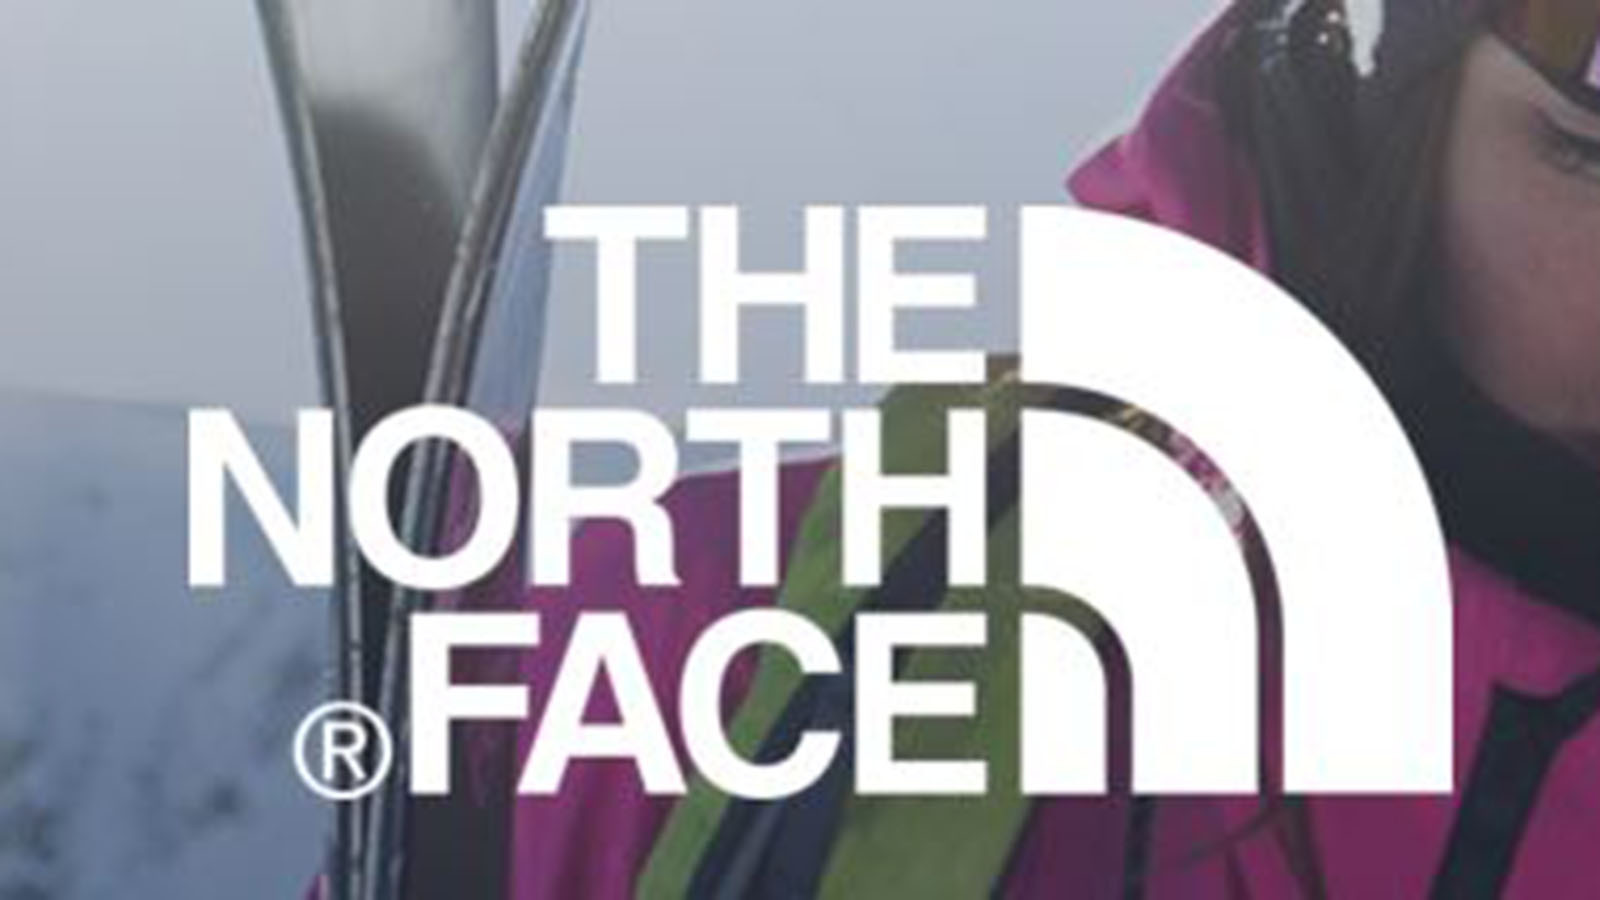 vf corp north face